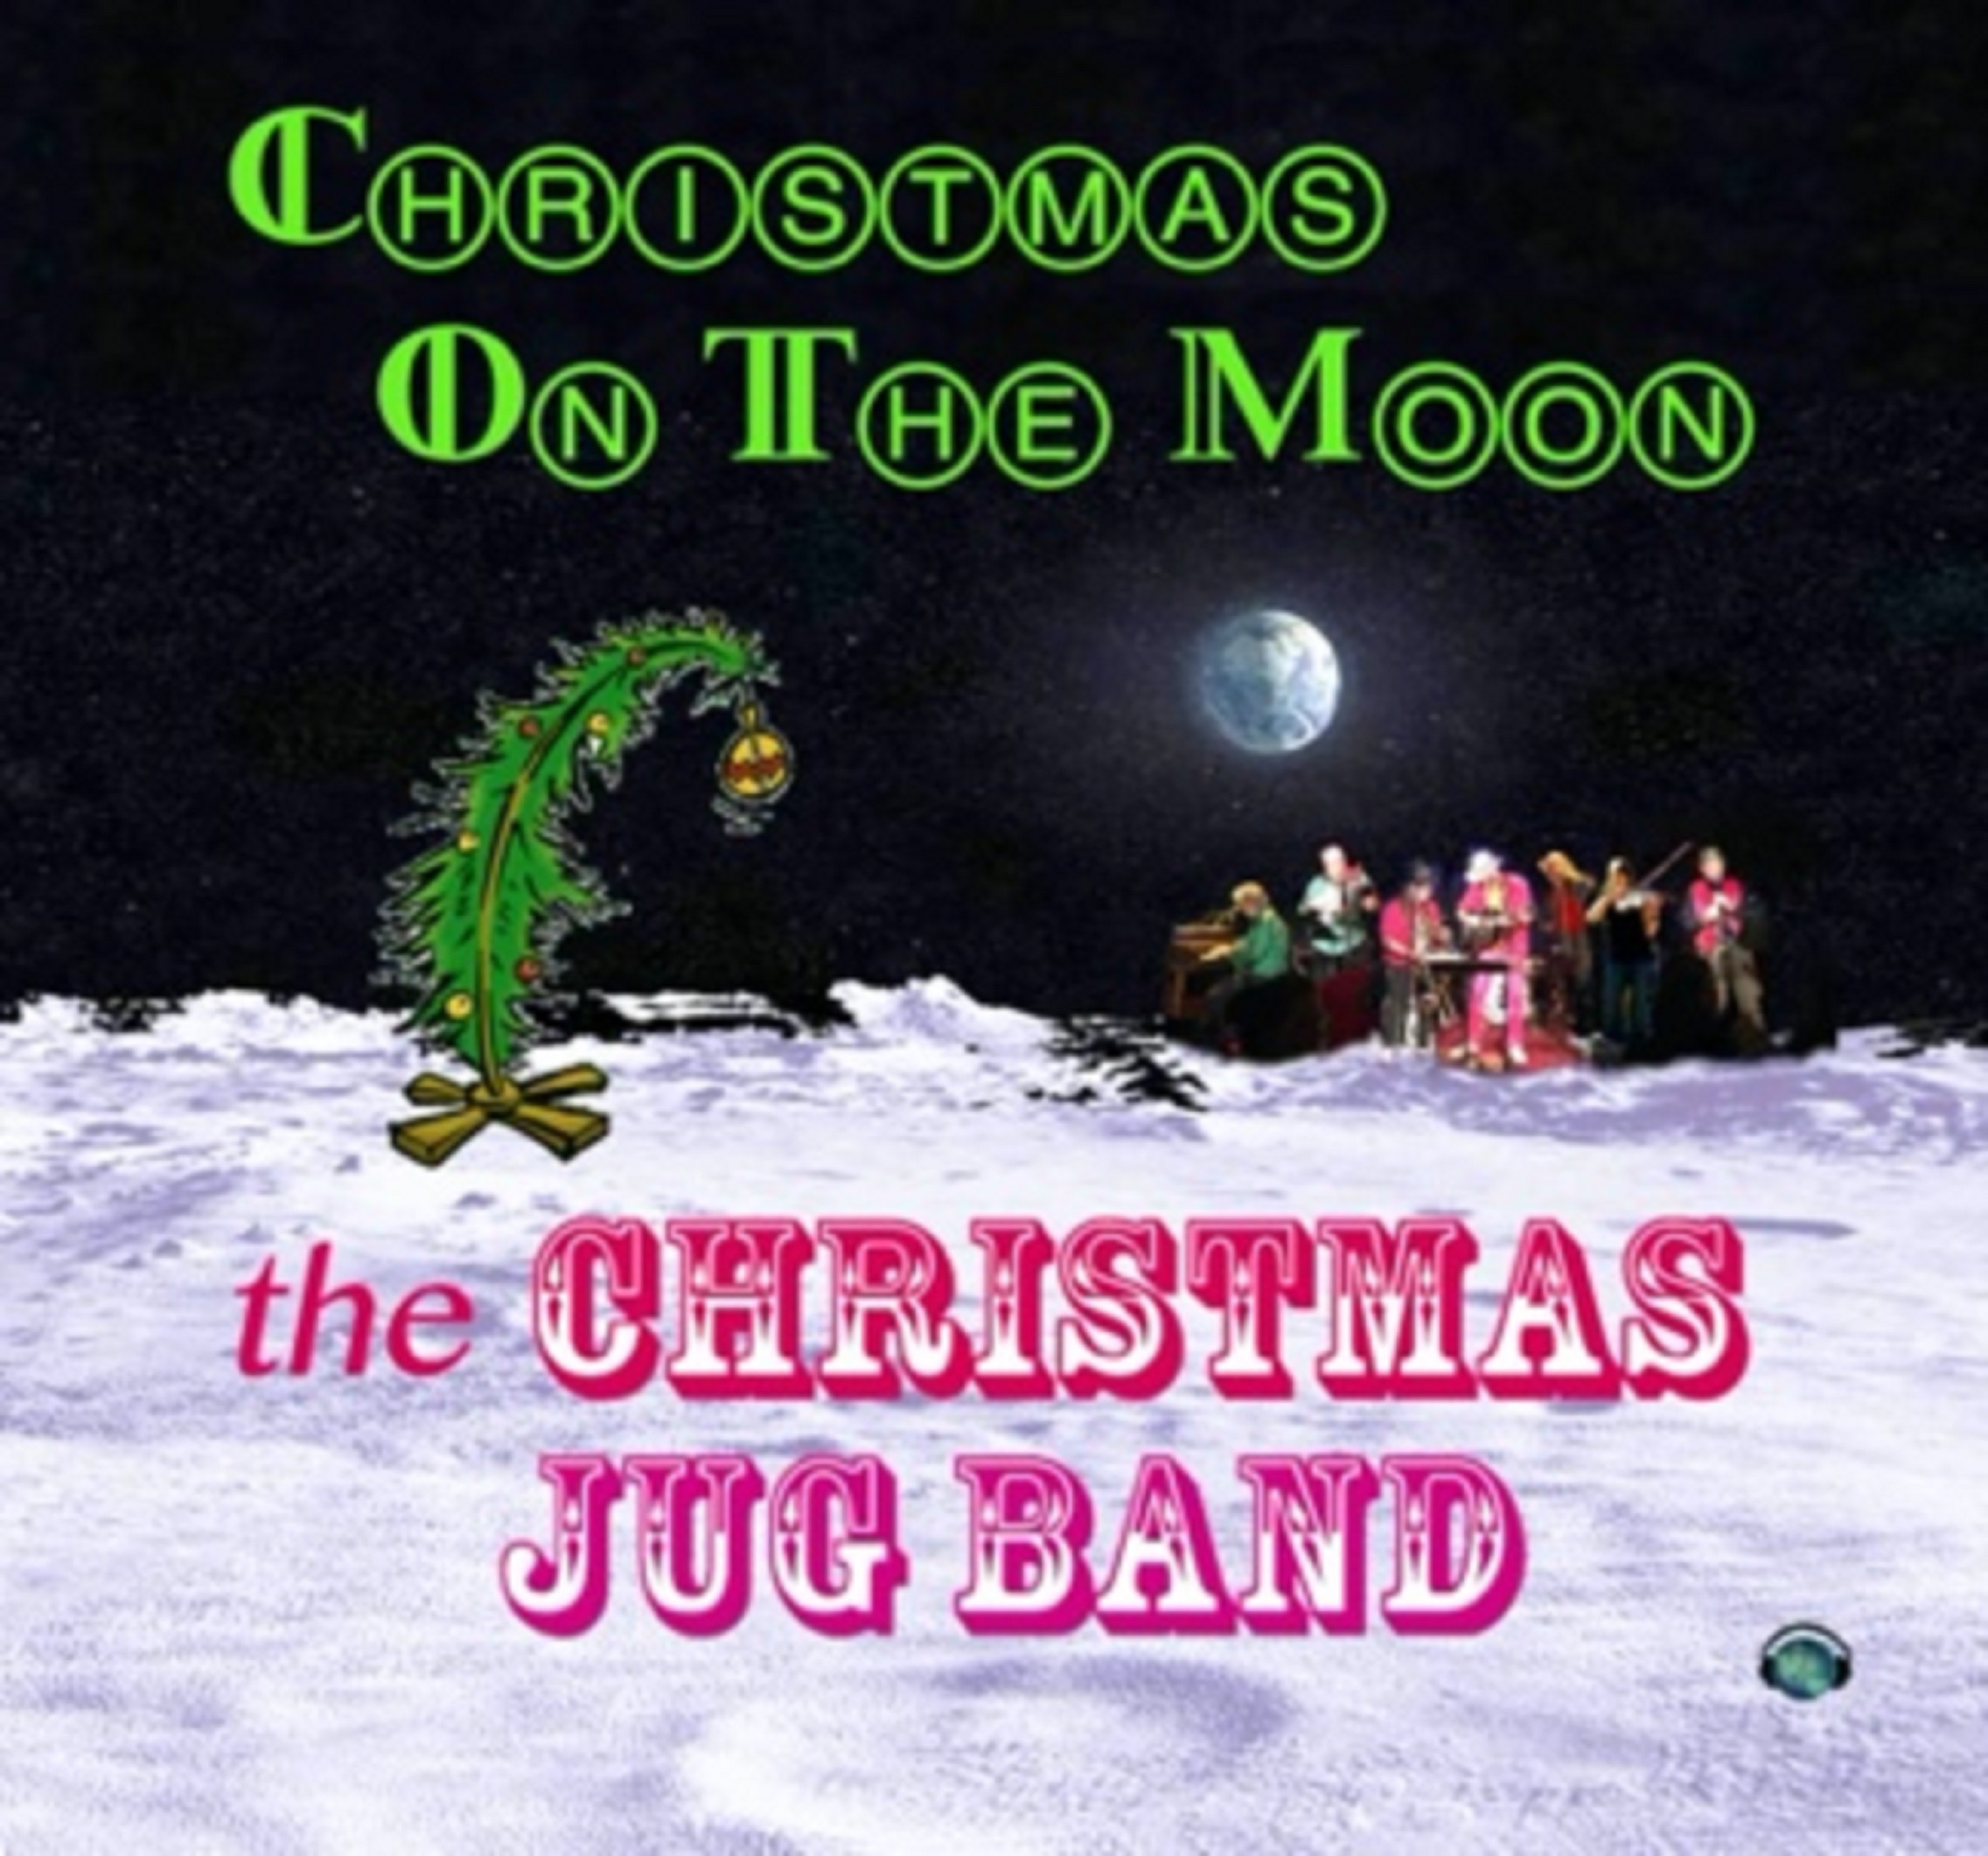 The Christmas Jug Band Announce Tour Dates and Release Holiday Single "Christmas On The Moon"